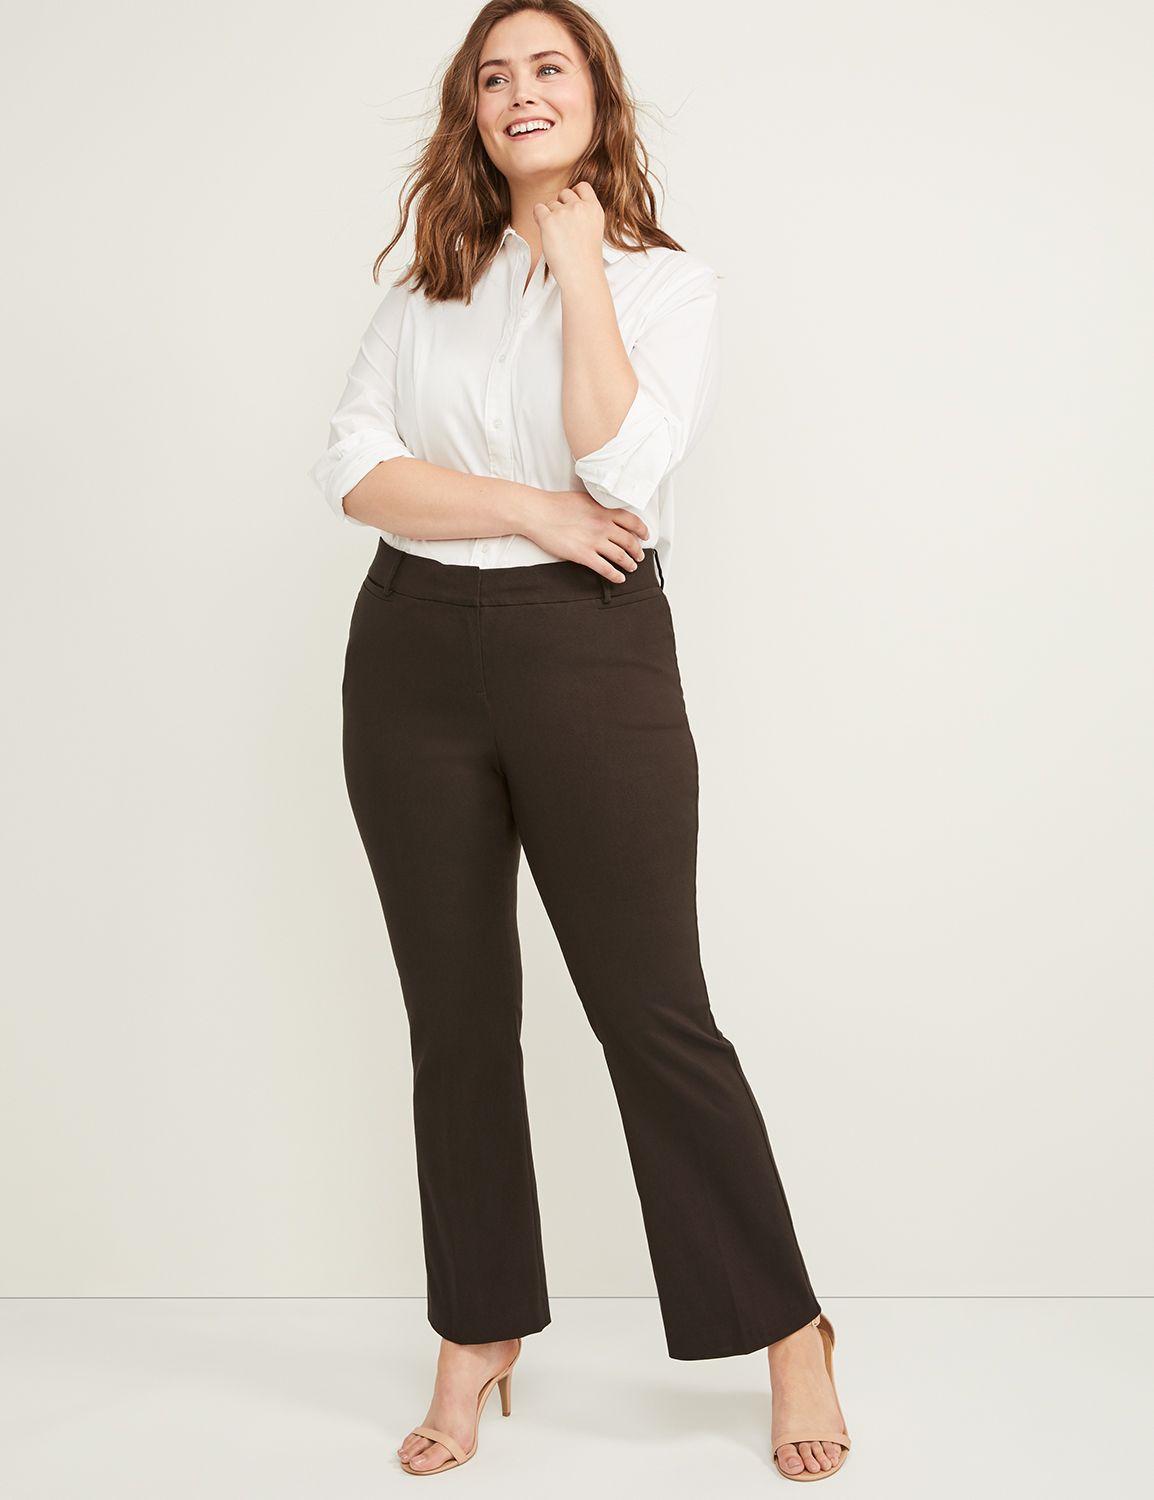 Allie Sexy Stretch Boot Pant | Lane Bryant